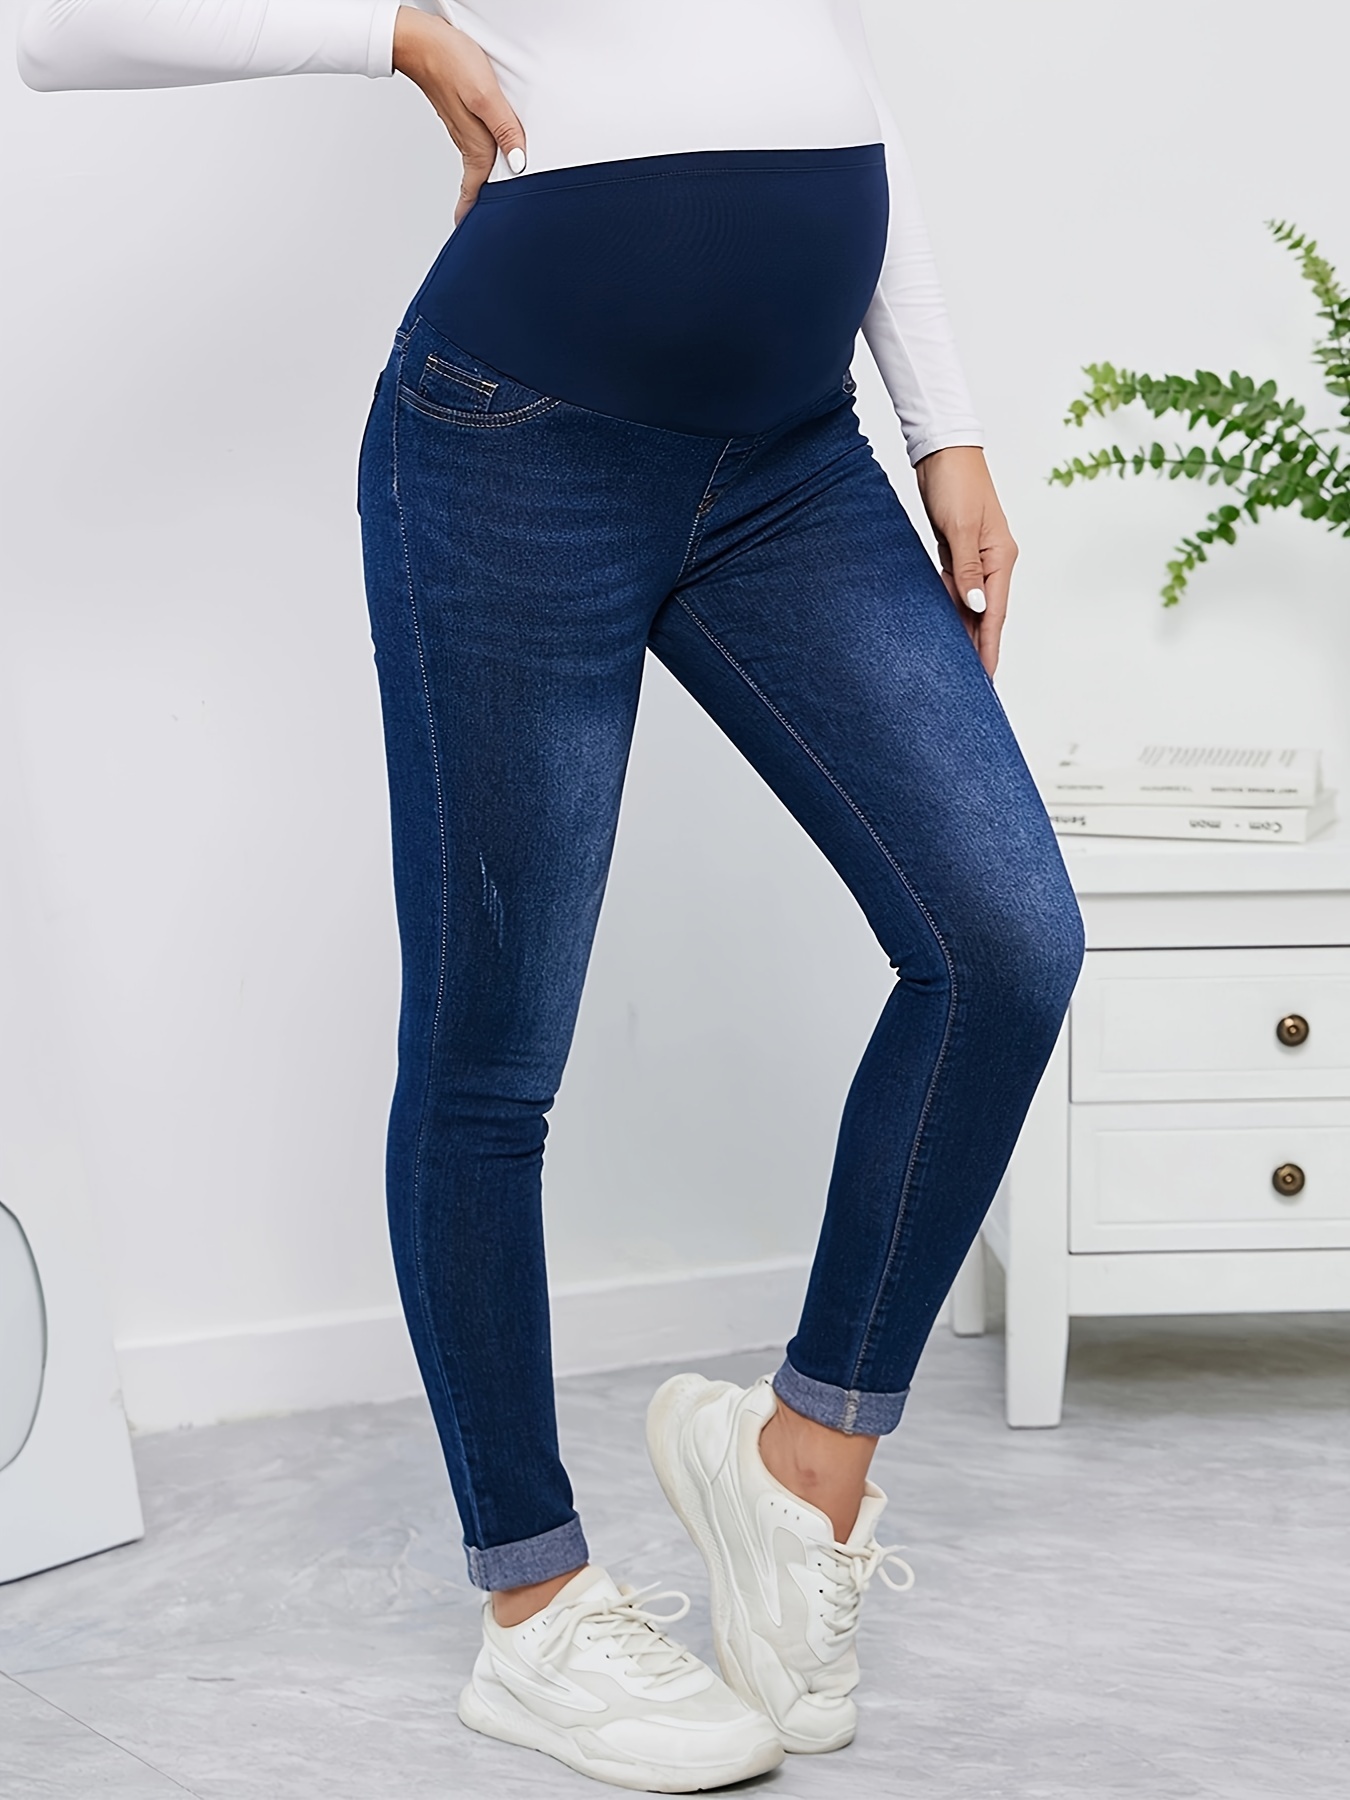 Pregnant Women Work Pants Stretchy Maternity Skinny Ankle Trousers Slim for  Women 